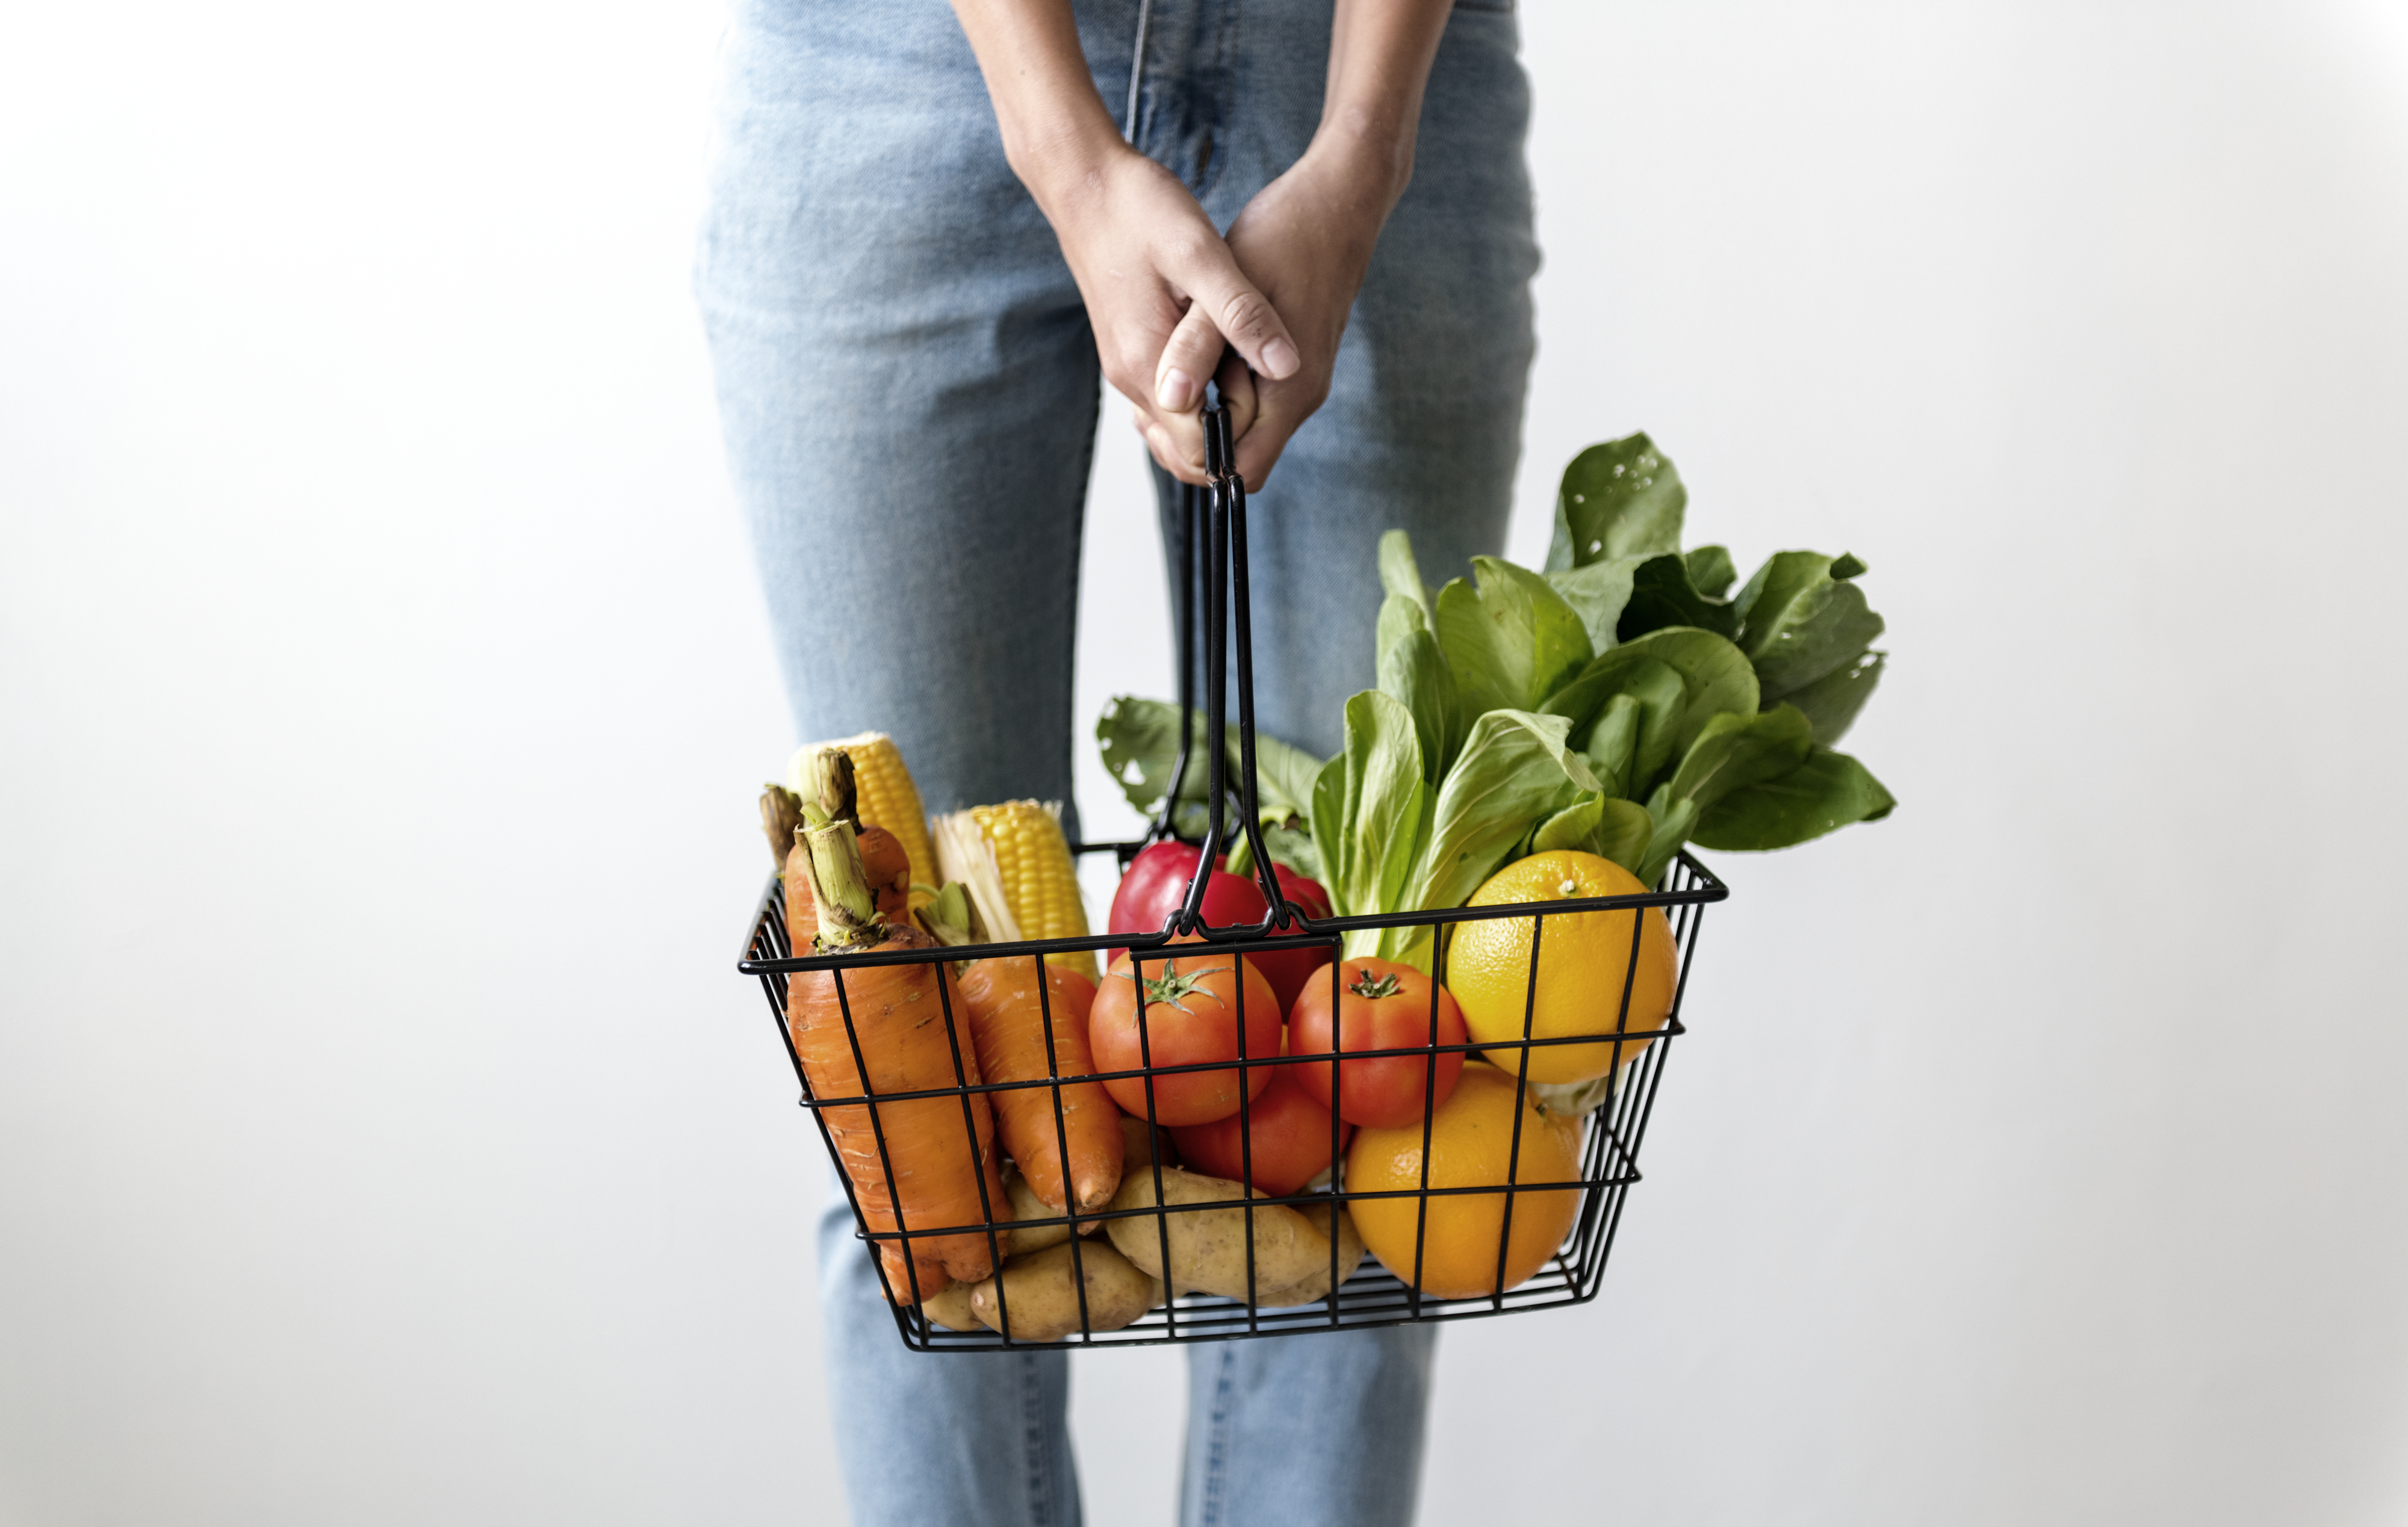 6 Simple Ways To Save Money On Groceries - 